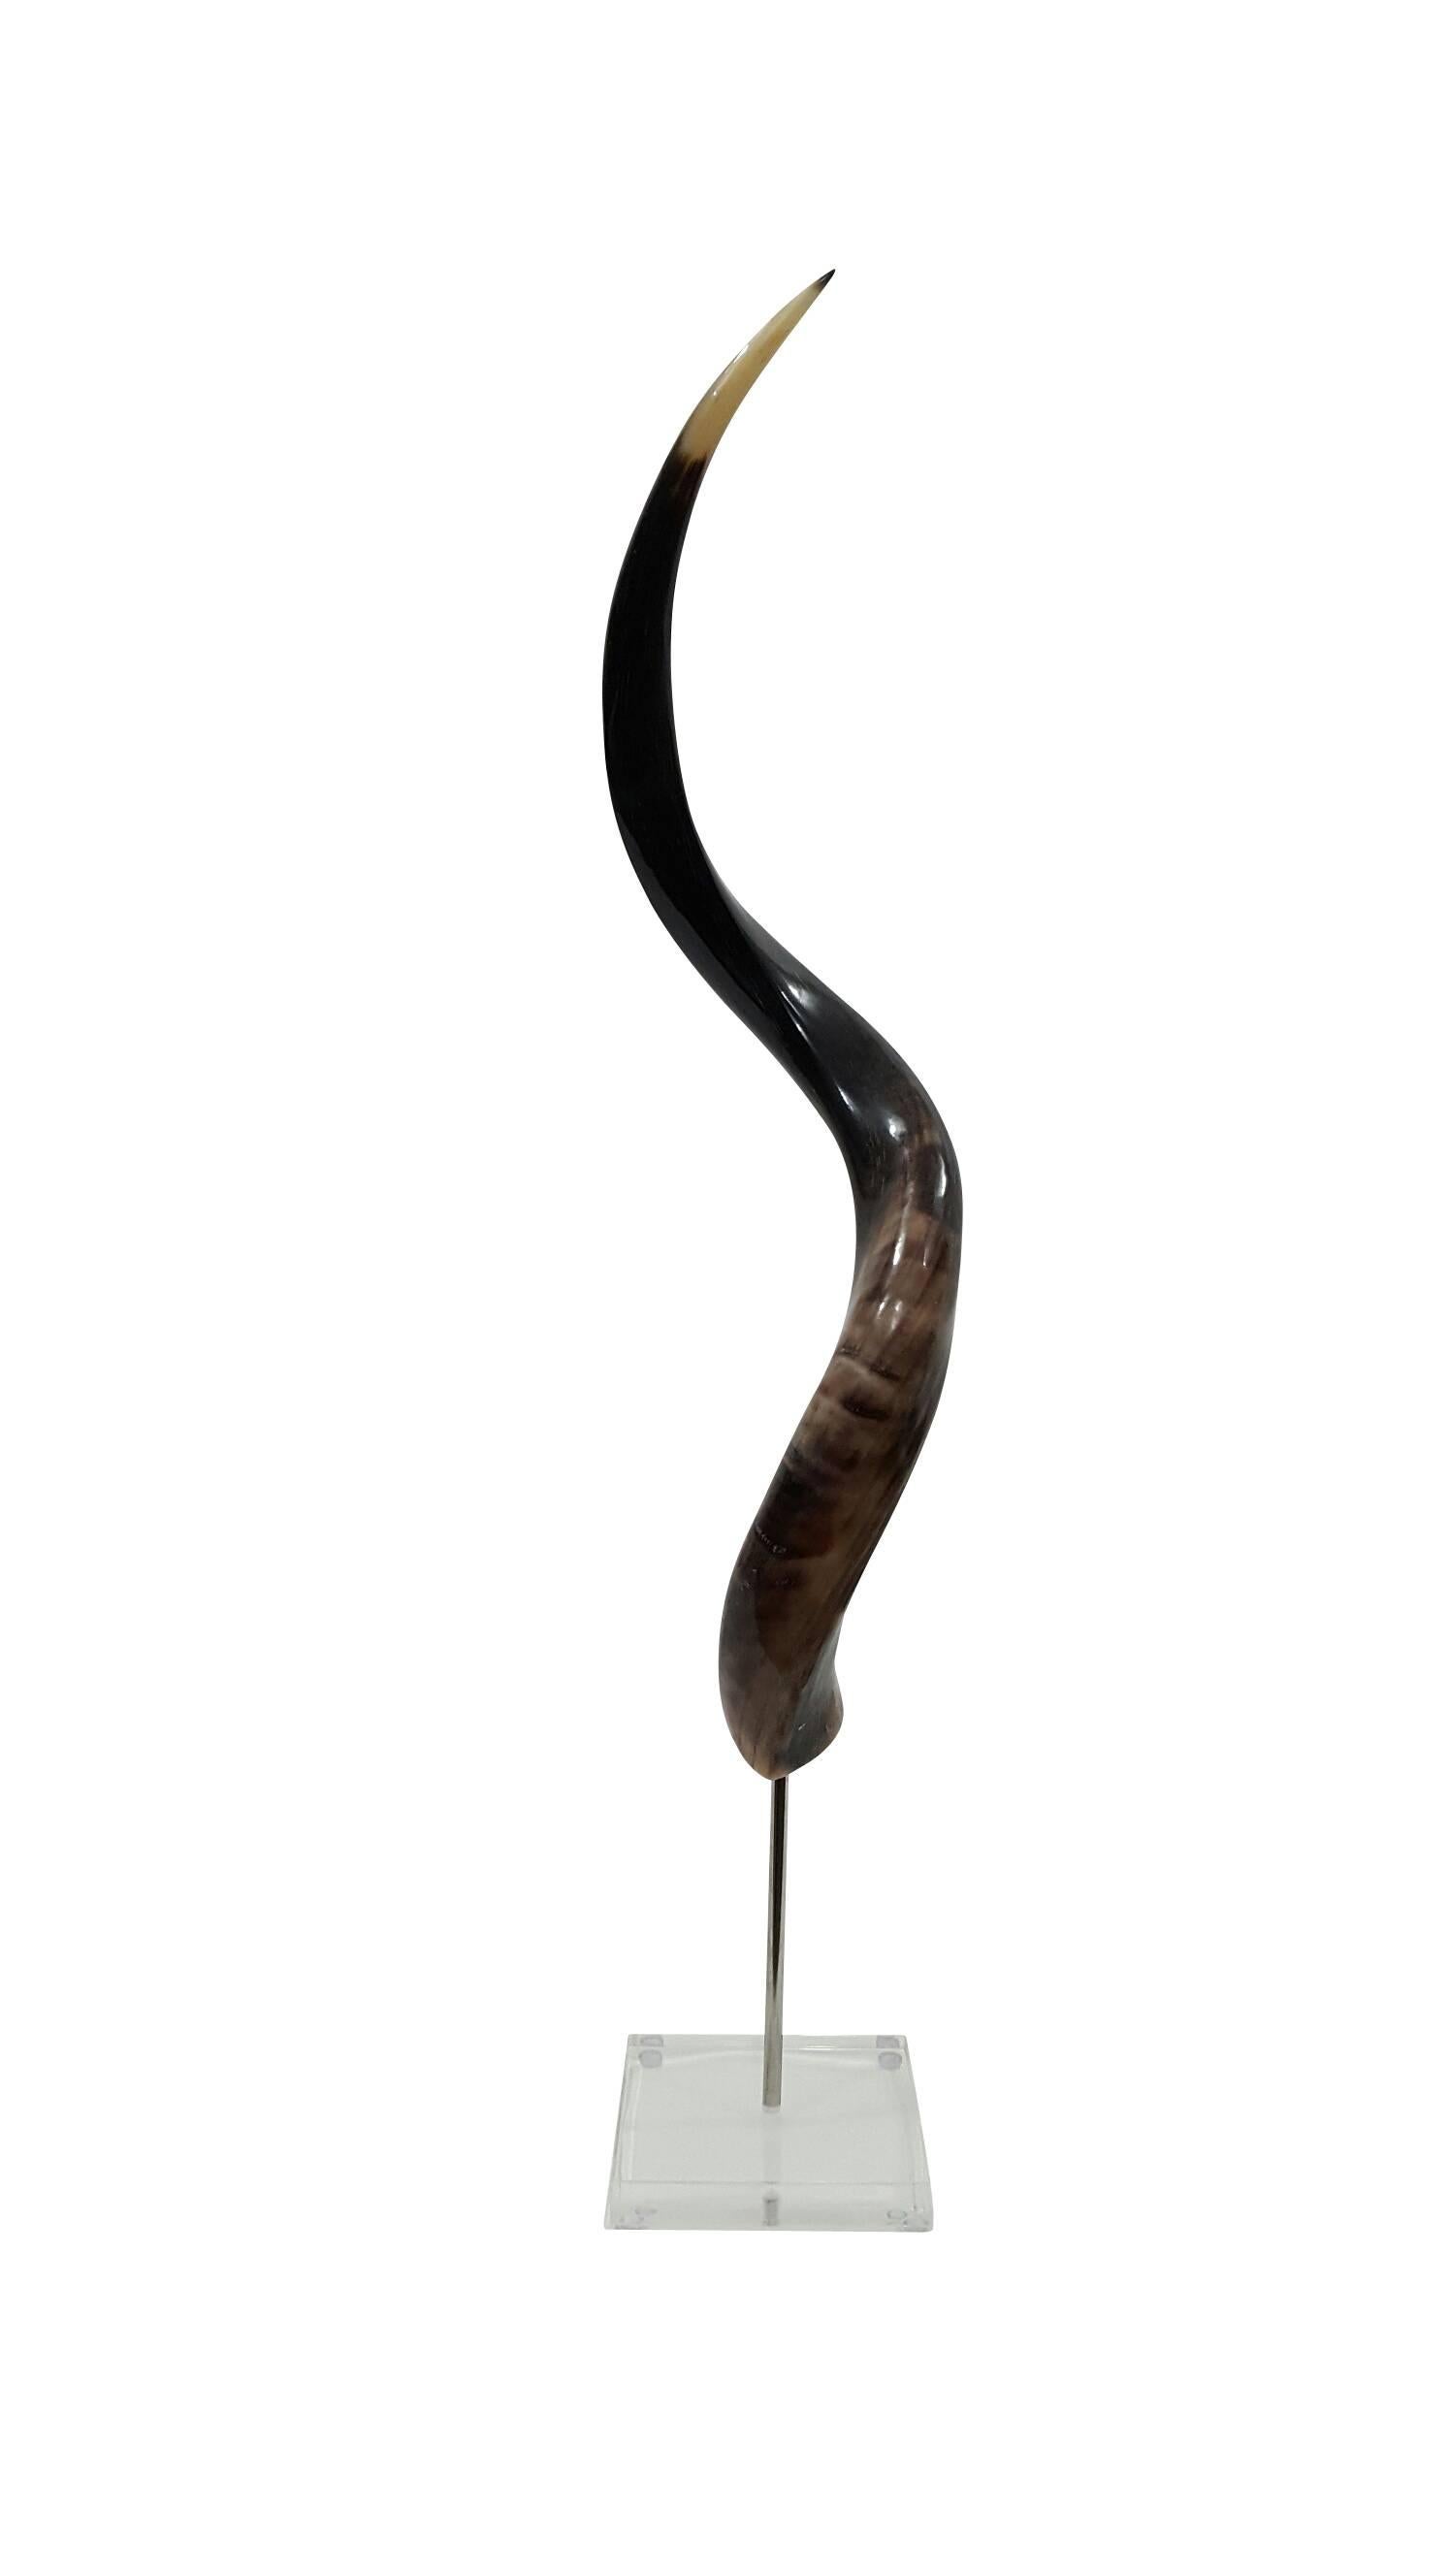 Beautiful Kudu horns on acrylic stand brown.
Dimensions: Stand 5" x 5", Total height 31.5".
Color & Size vary